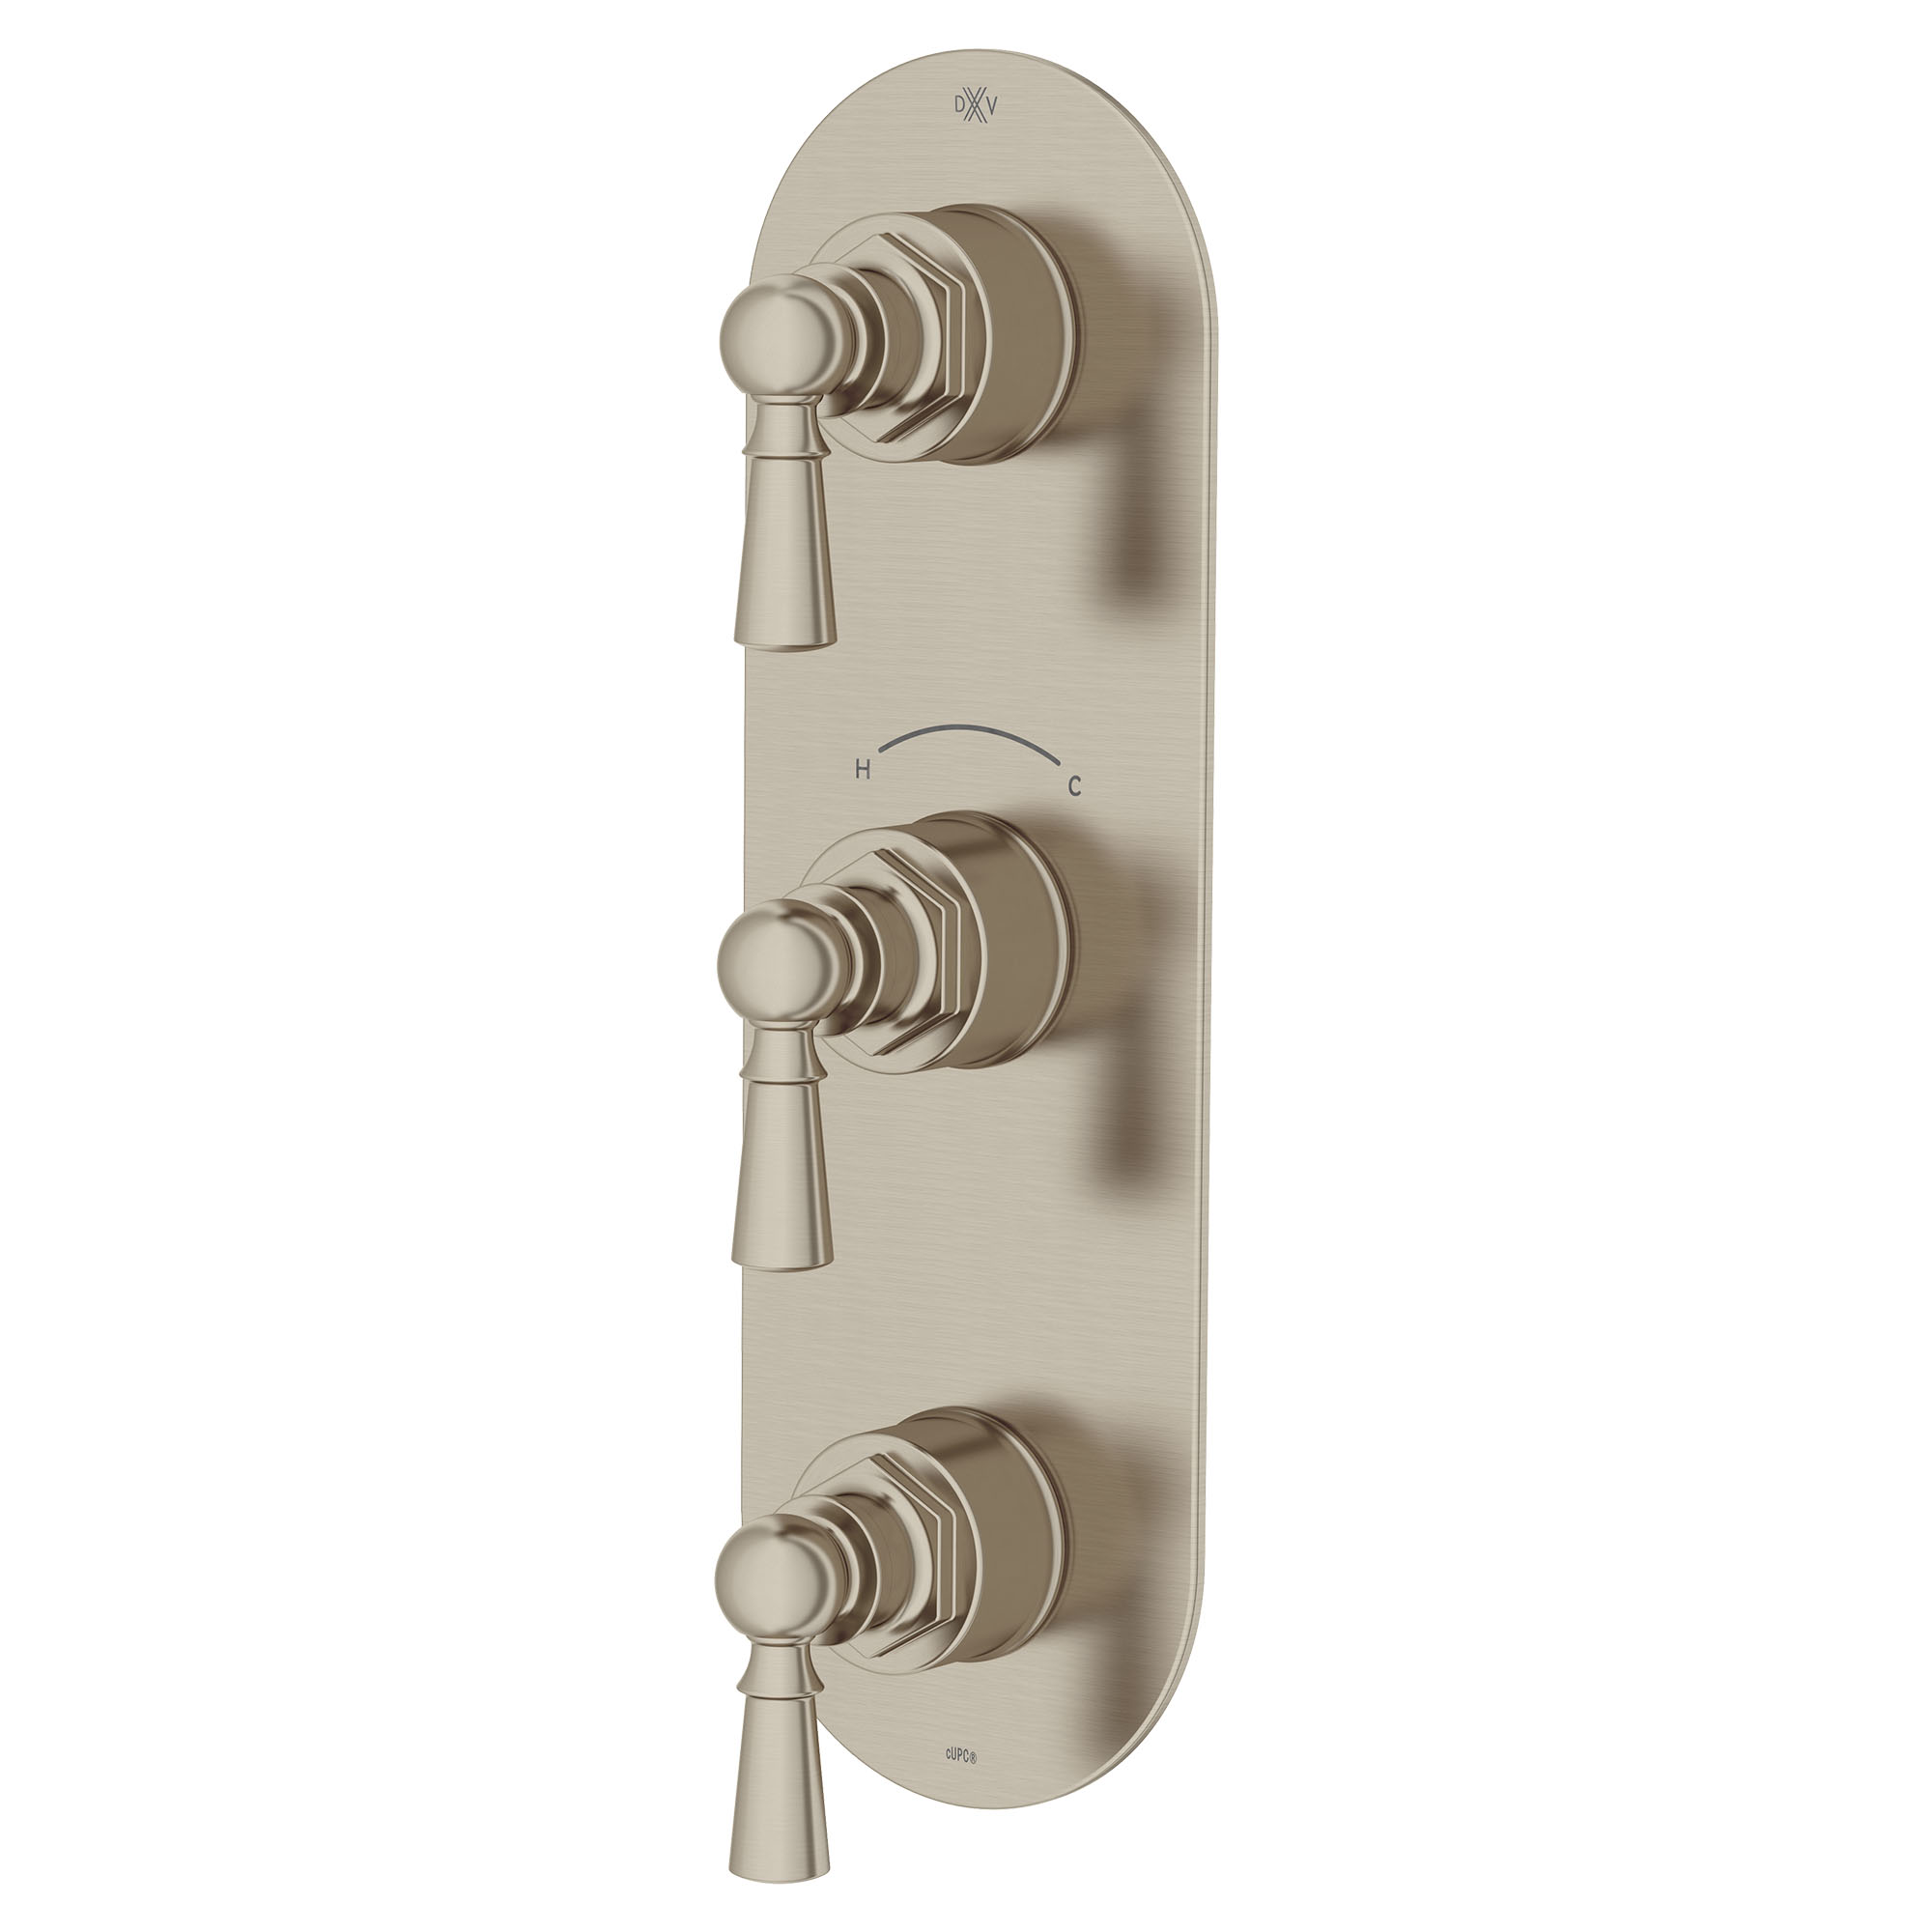 Oak Hill 3-Handle Thermostatic Valve Trim Only with Lever Handles